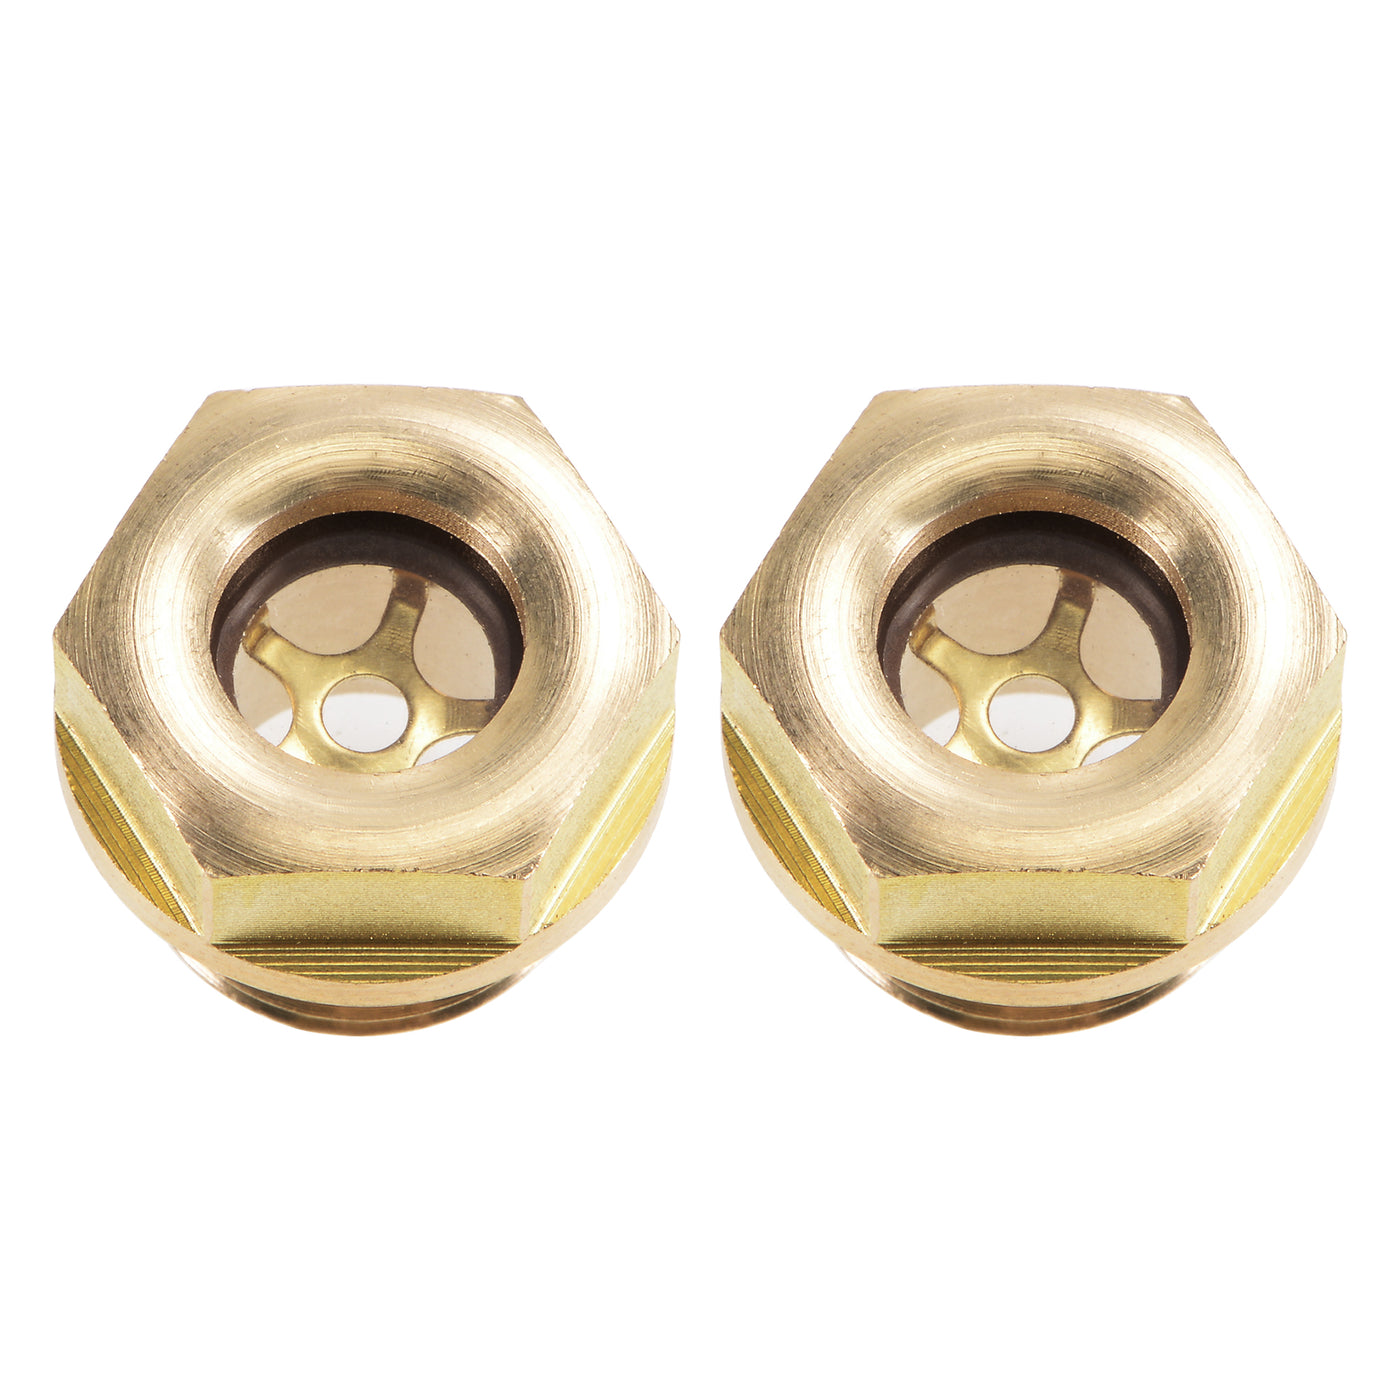 Uxcell Uxcell Oil Liquid Level Gauge Sight Glass G3/4 Male Threaded Brass Air Compressor Fittings with O-Ring, Yellow 2Pcs